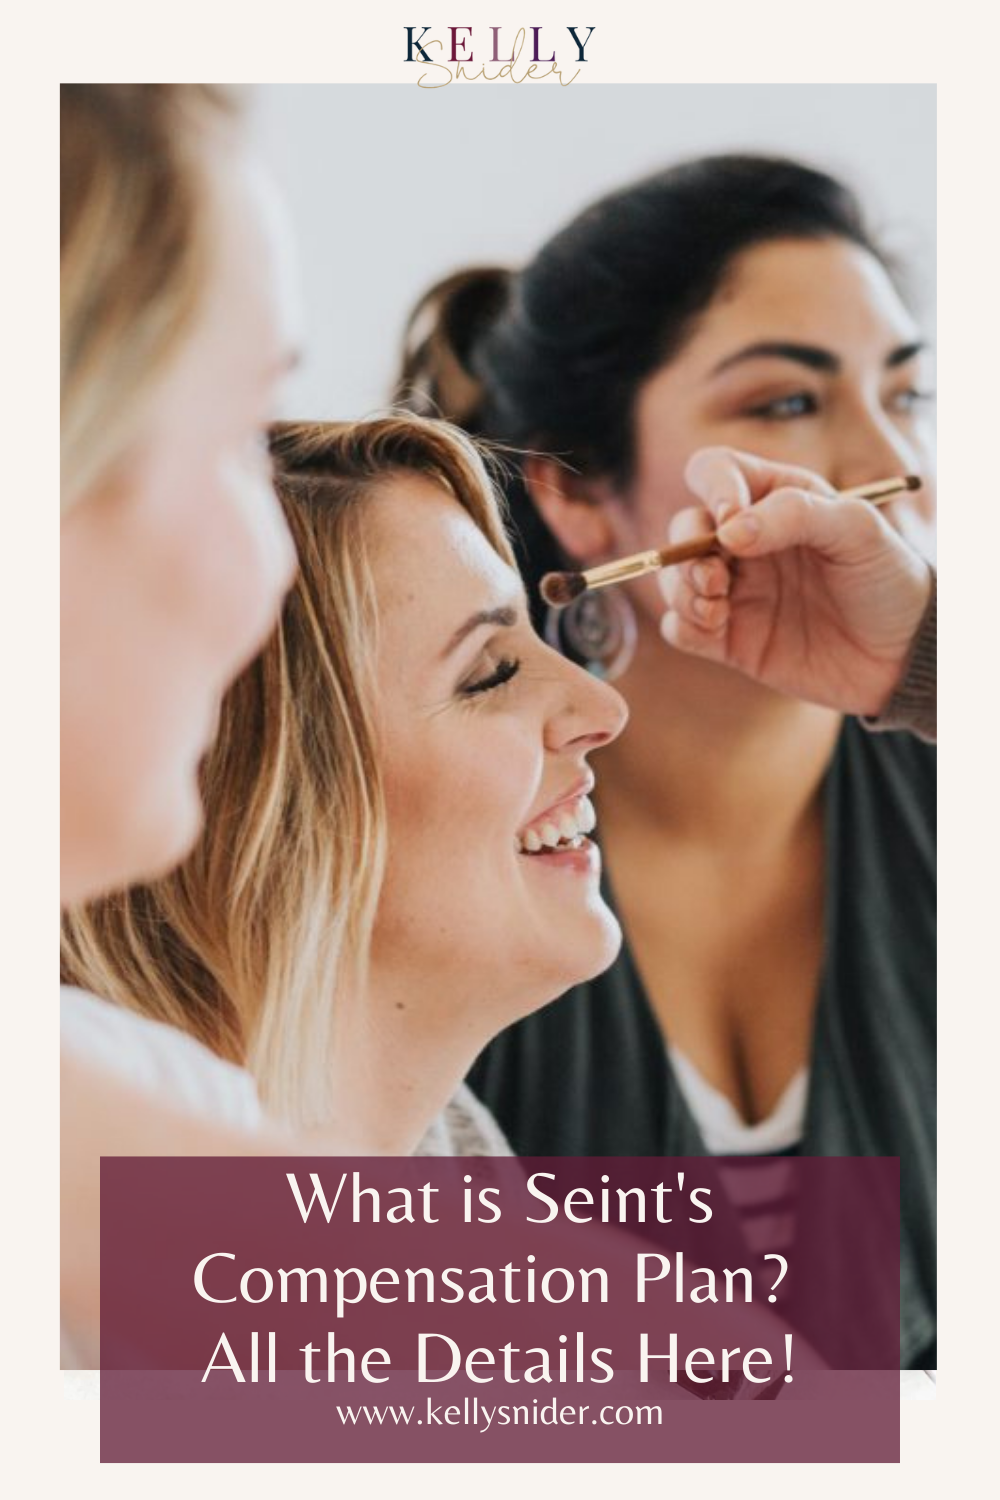 What is Seint Makeup's Compensation Plan? Kelly Snider